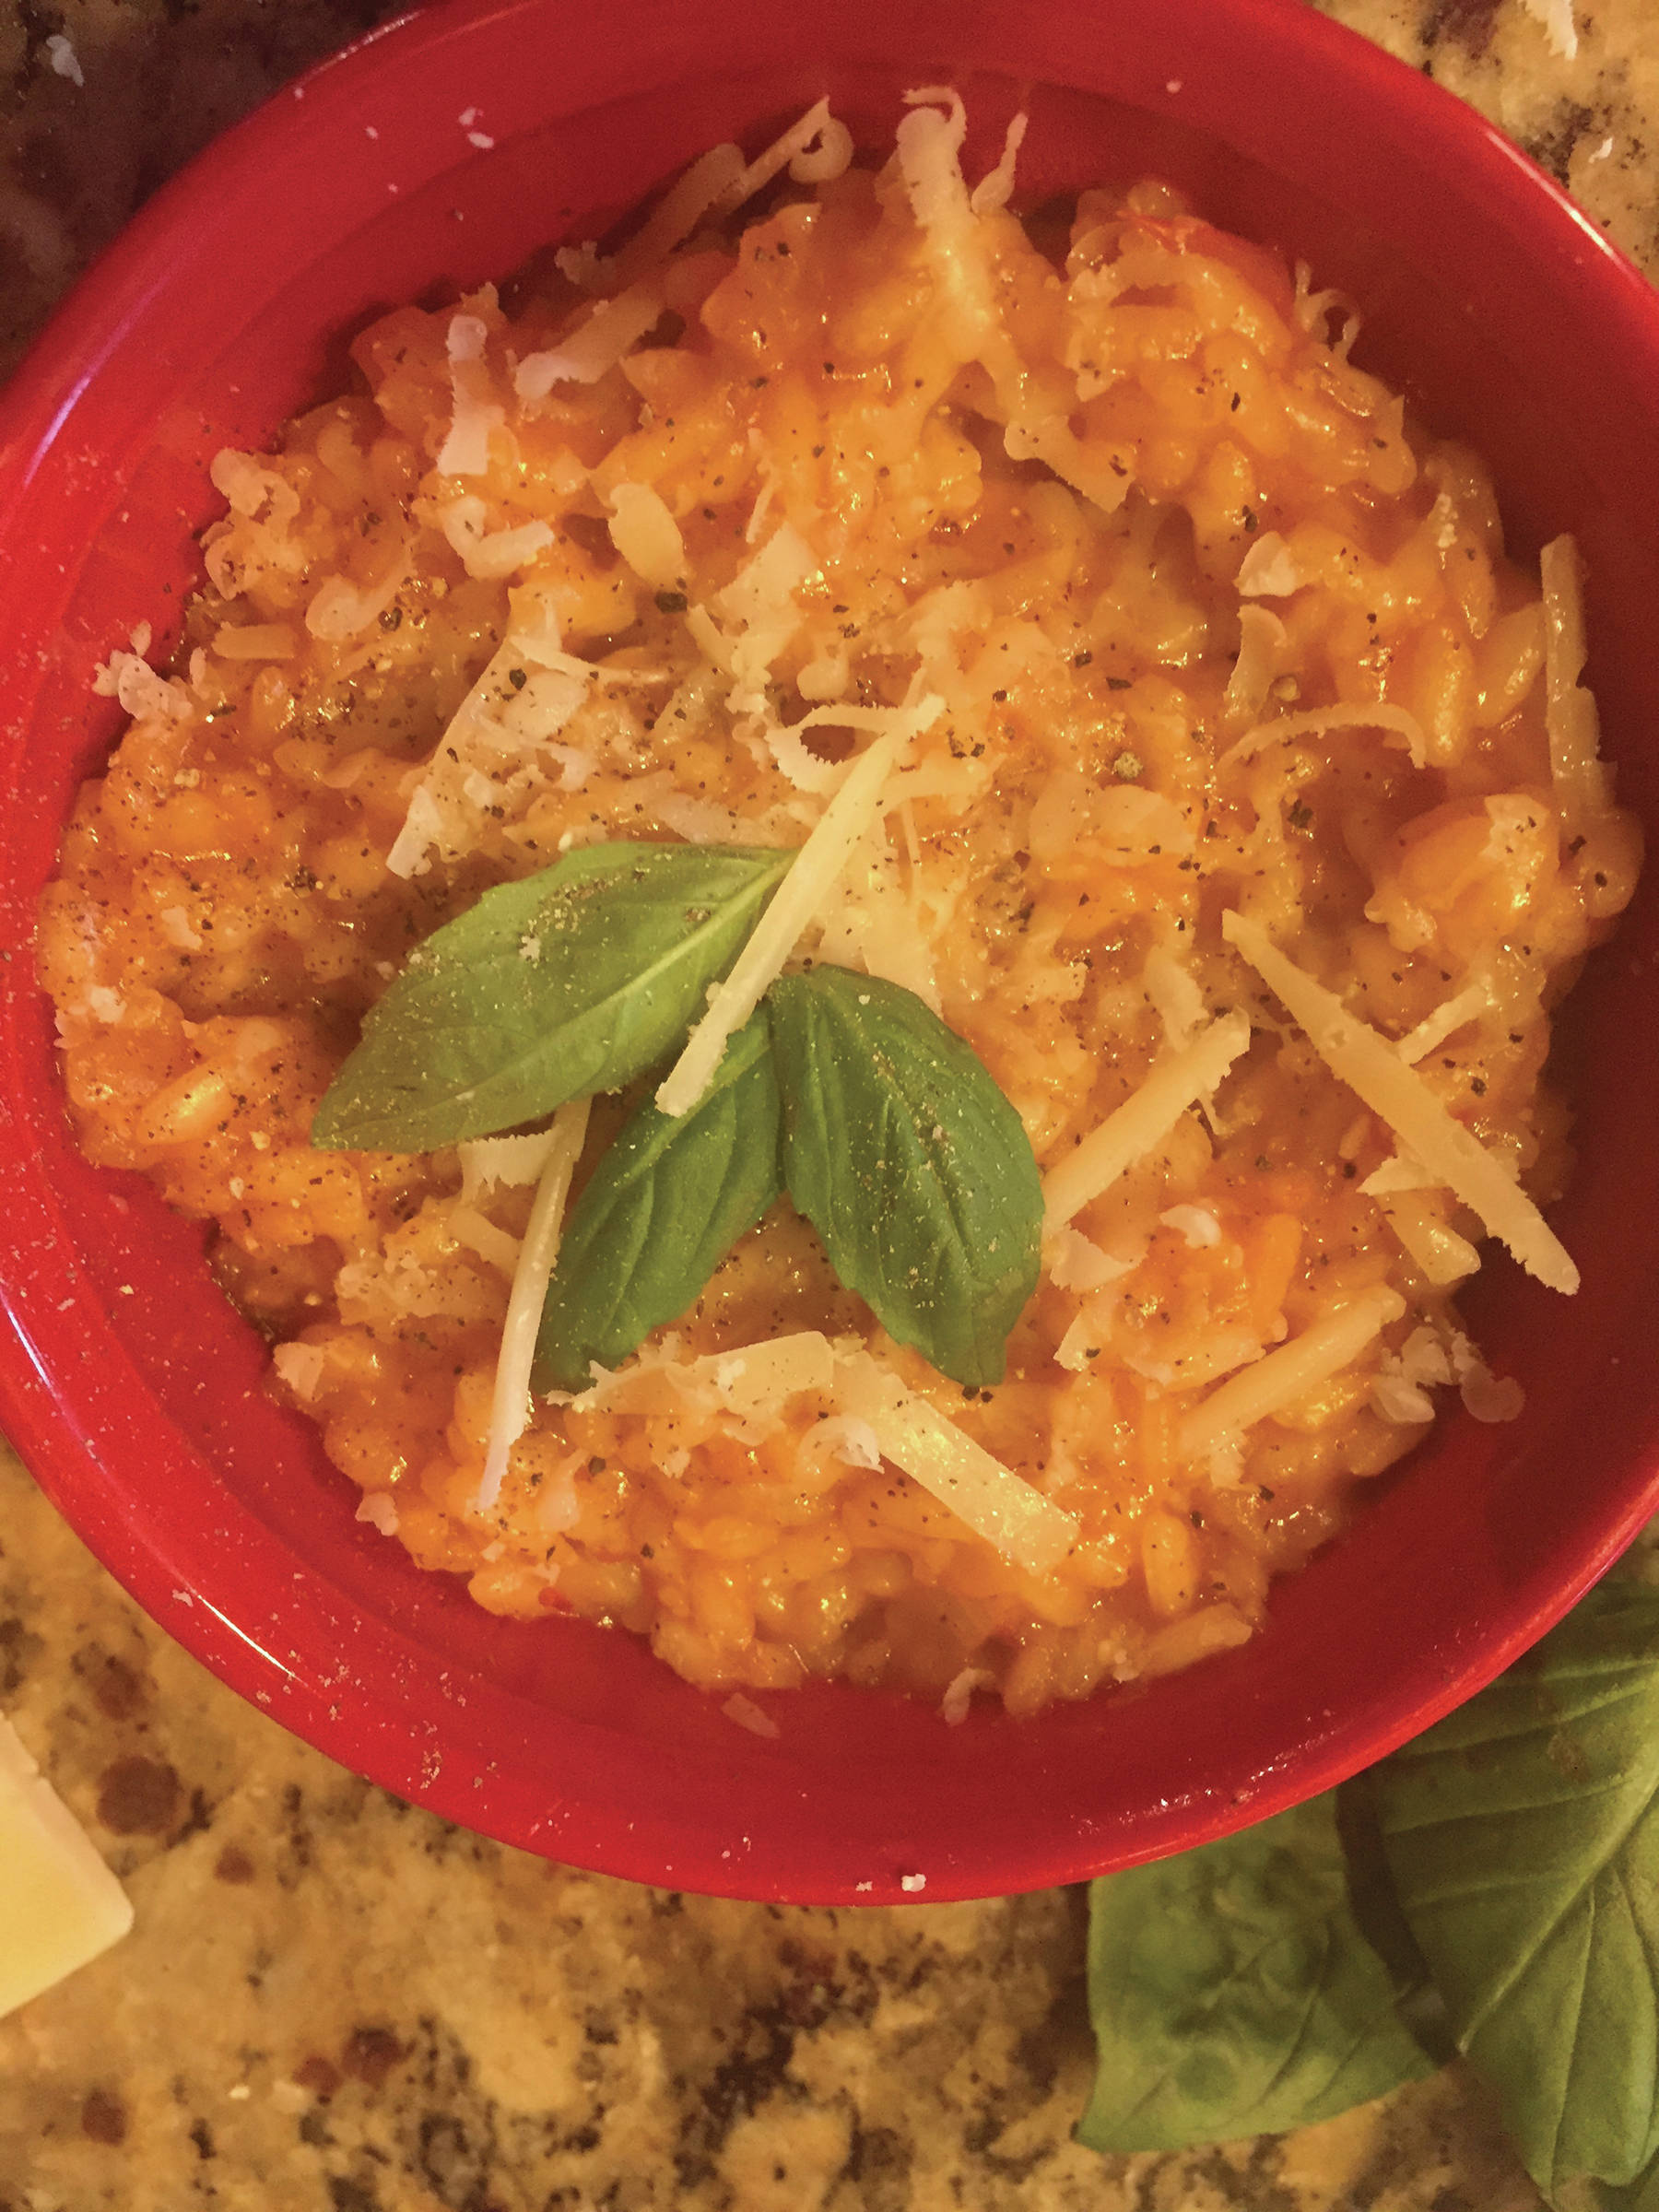 Tomato Risotto takes time to make, but the preparation can be therapeutic. Garnish with snipped basil, as seen here in Teri Robl’s kitchen in this photo taken on Sept. 17, 2019, in Homer, Alaska. (Photo by Teri Robl)